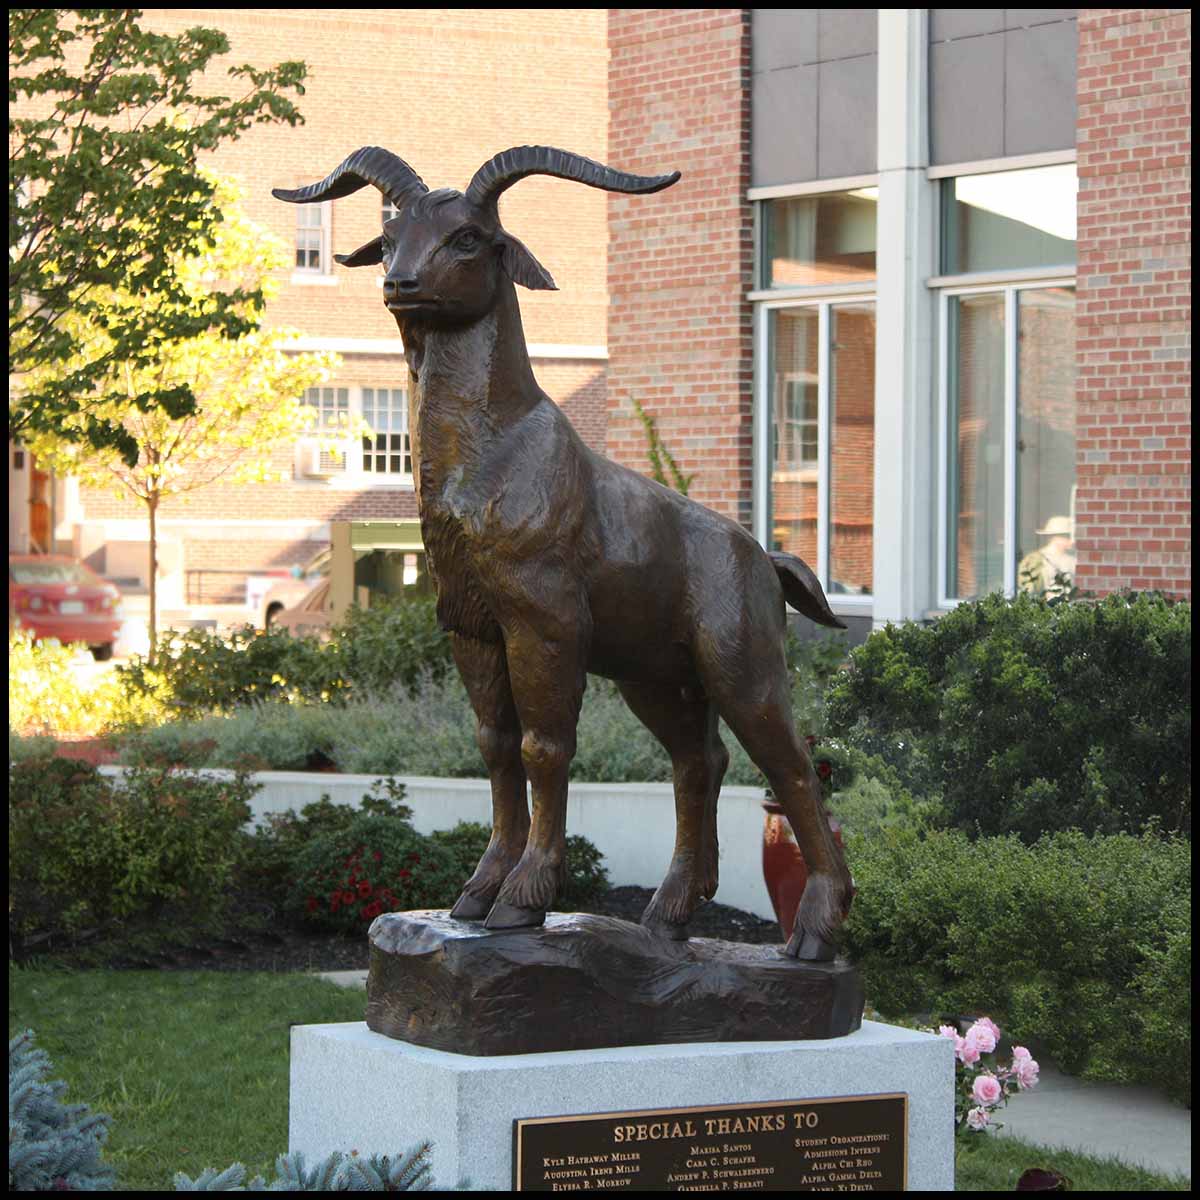 photo of bronze sculpture of goat standing on sculpted incline on granite base surrounded by greenery and brick buildings